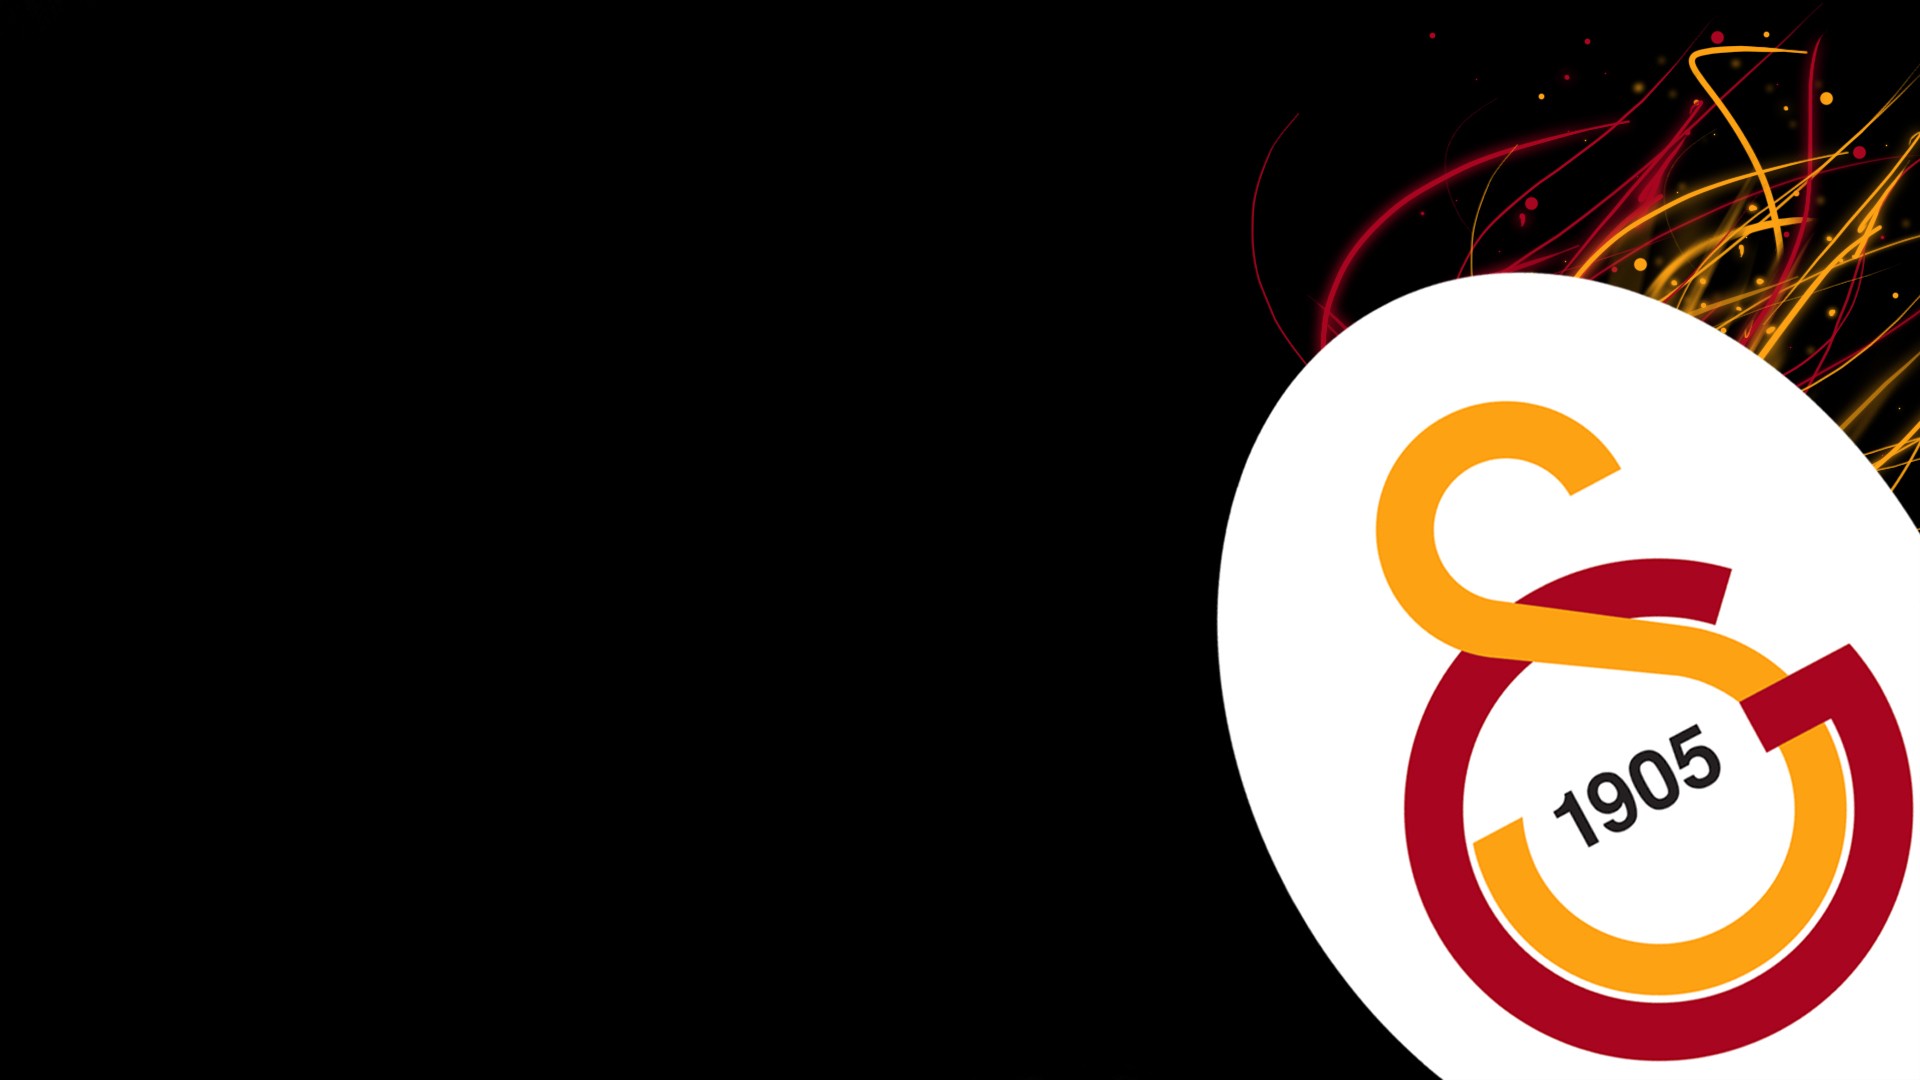 General 1920x1080 Galatasaray S.K. soccer clubs 1905 (Year) simple background sport black background